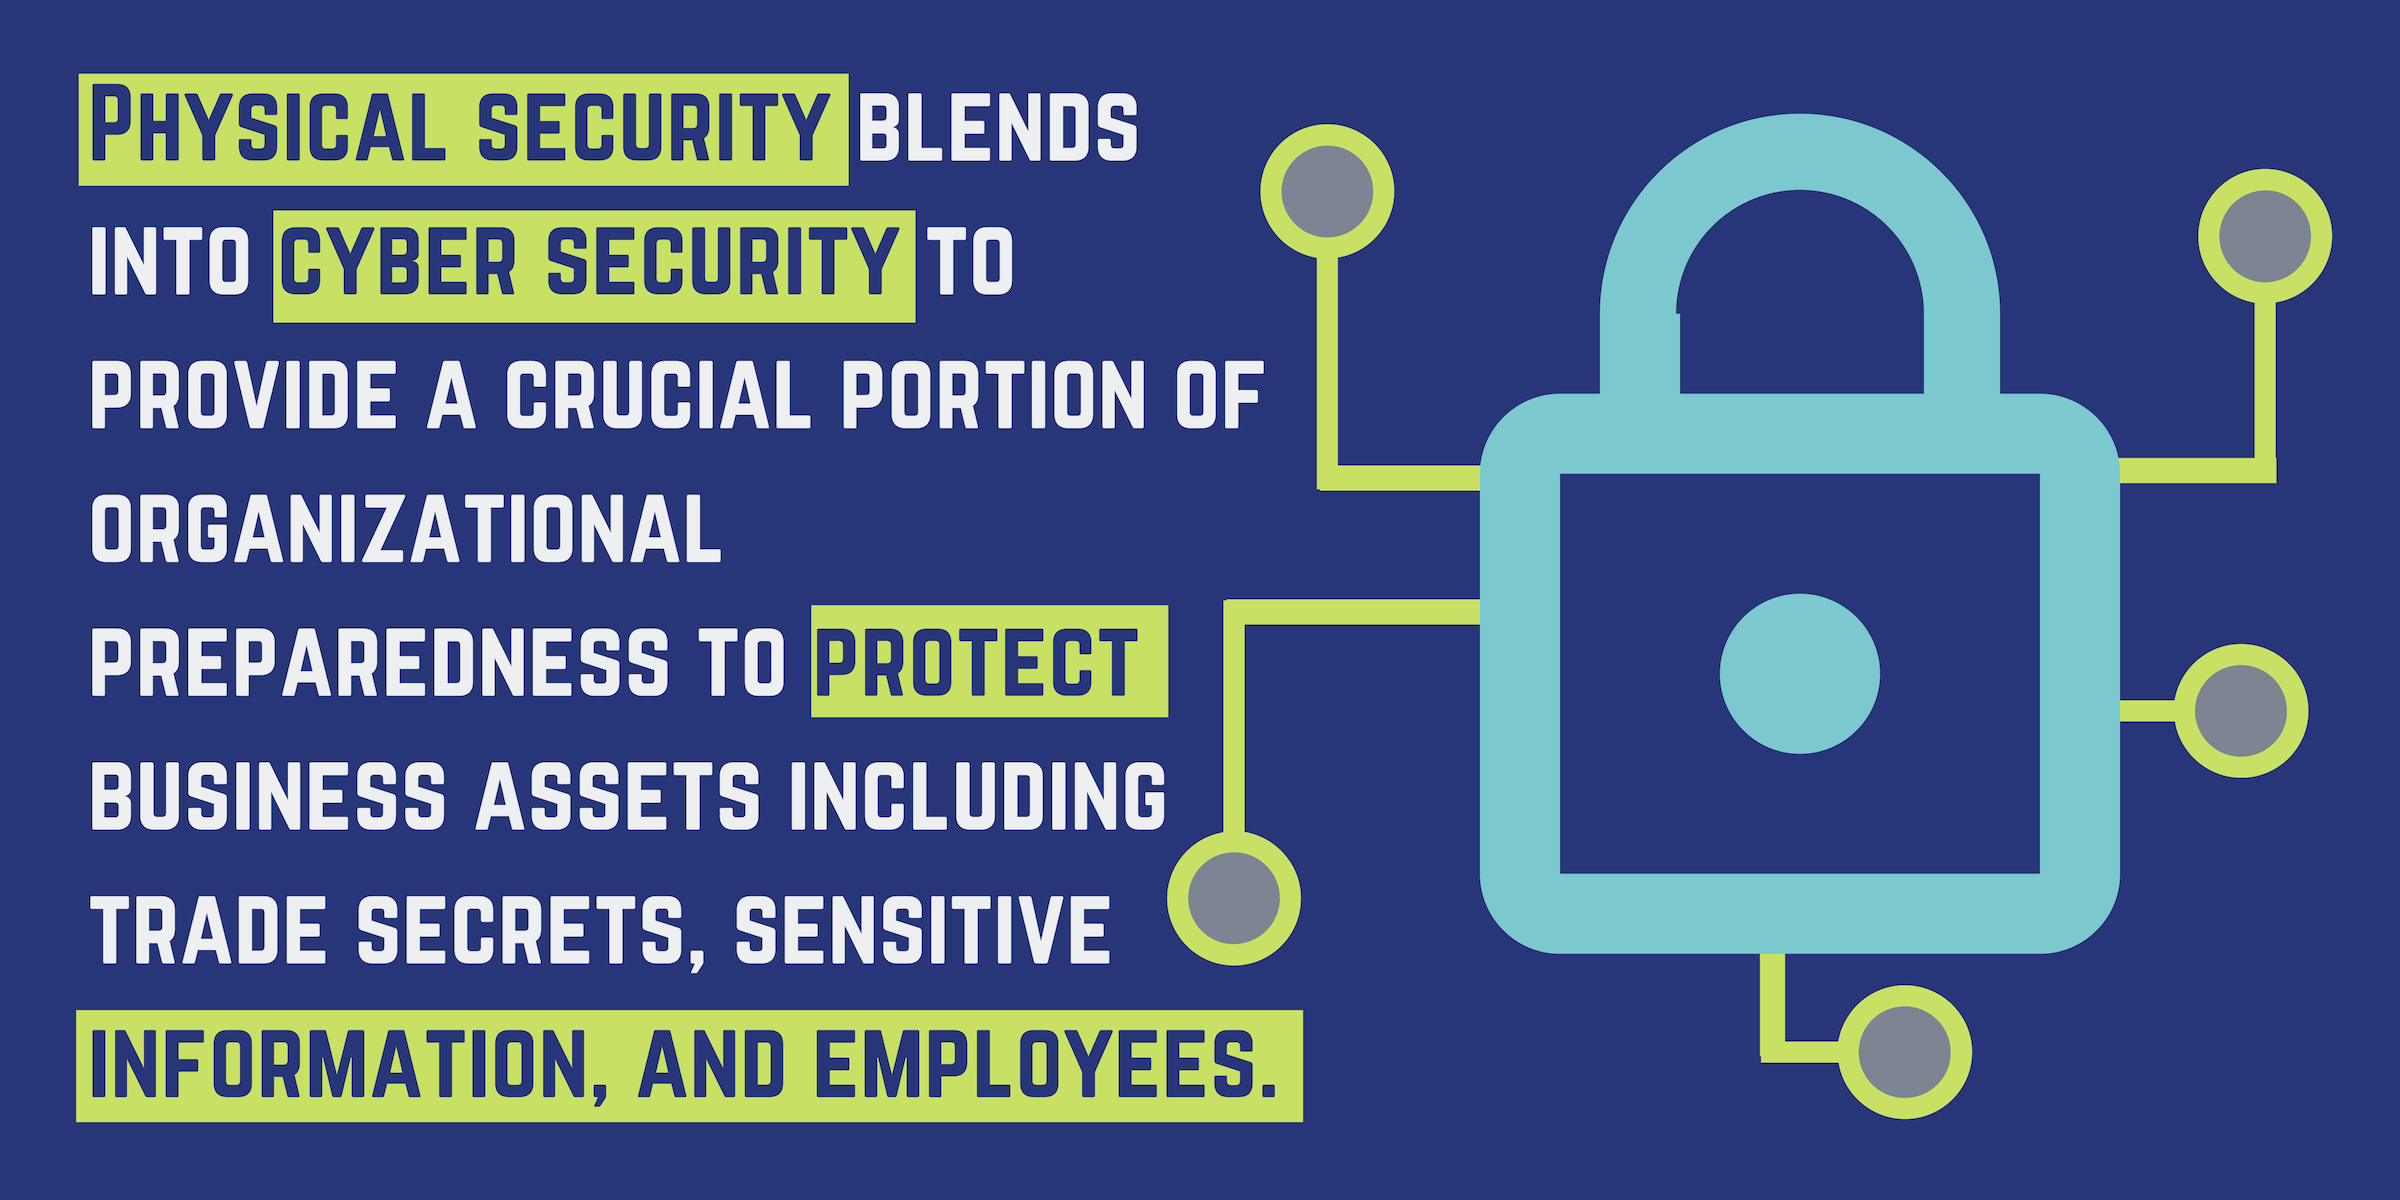 Physical security blends into cyber security to provide a crucial portion of organizational preparedness to protect business assets including trade secrets, sensitive information, and employees.